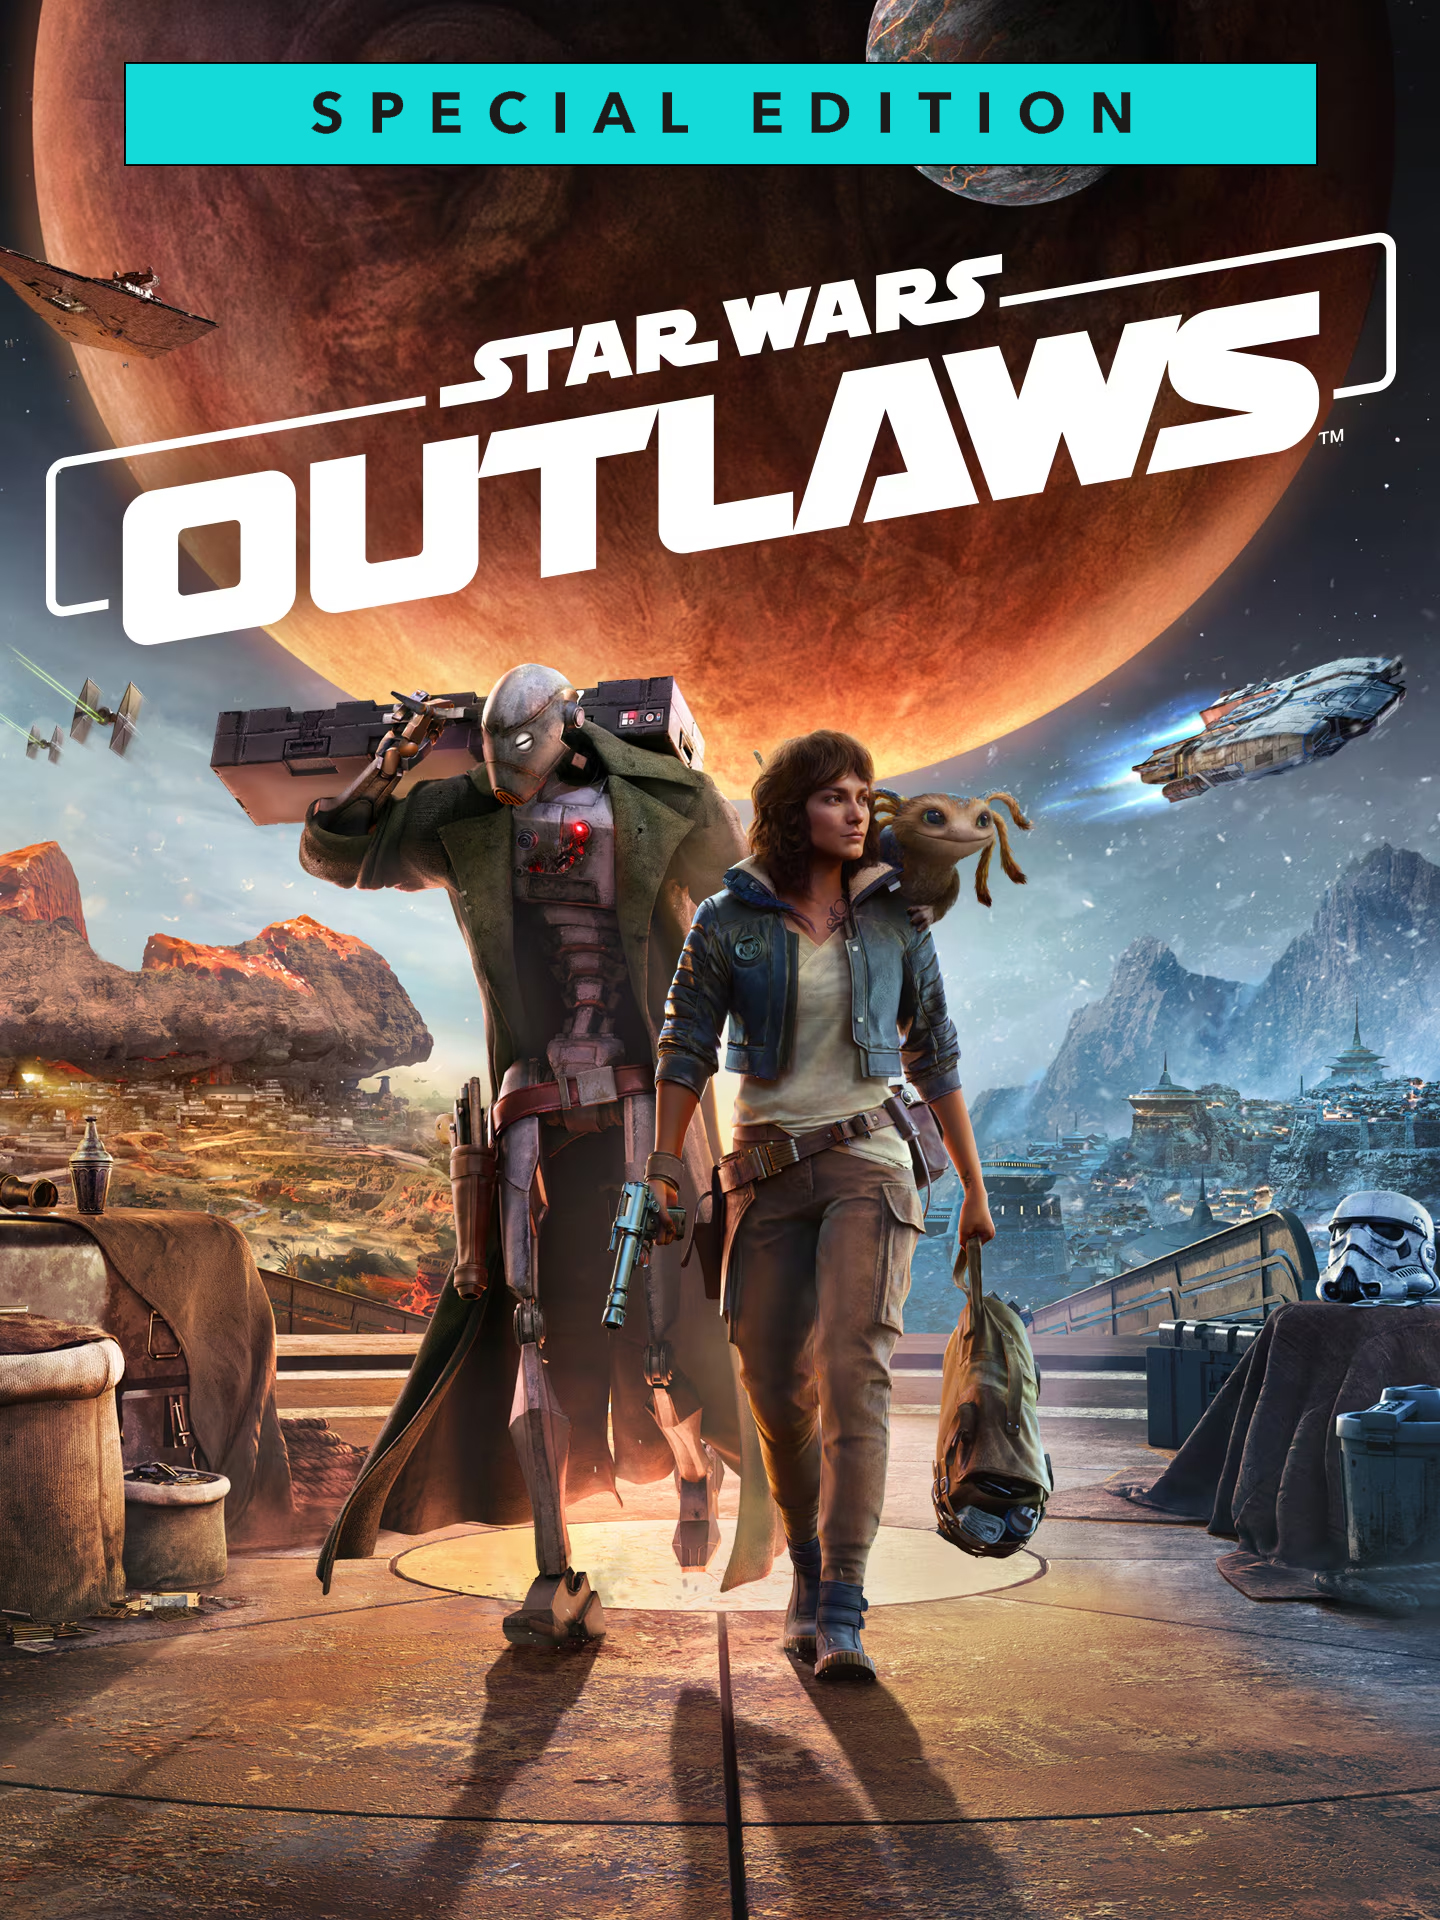 Star Wars Outlaws: Special Edition